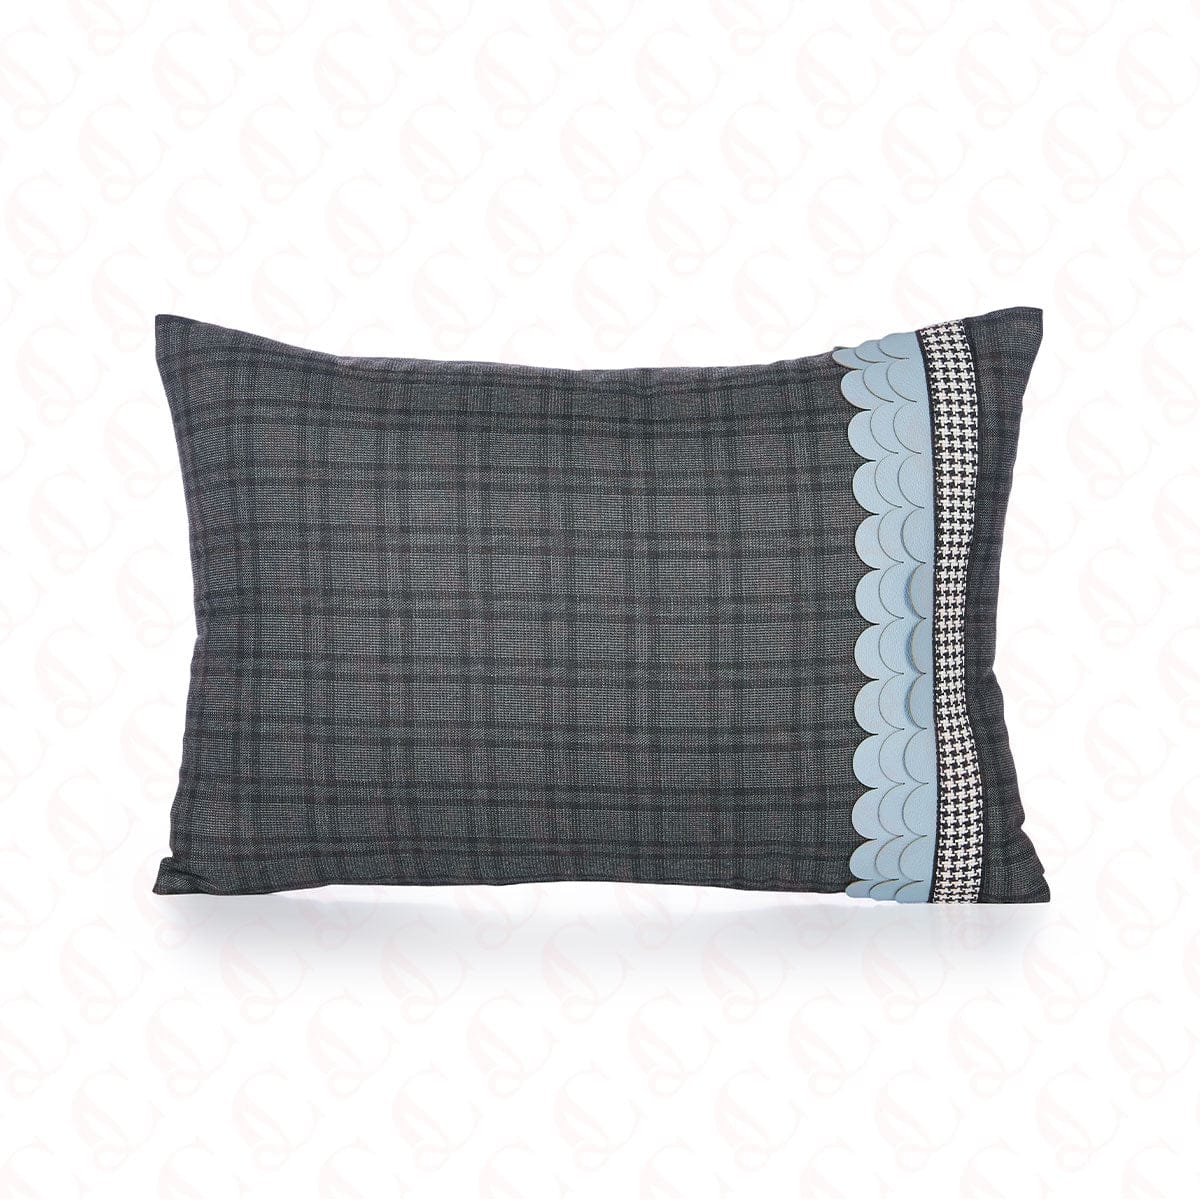 Houndstooth Cushion Cover Design